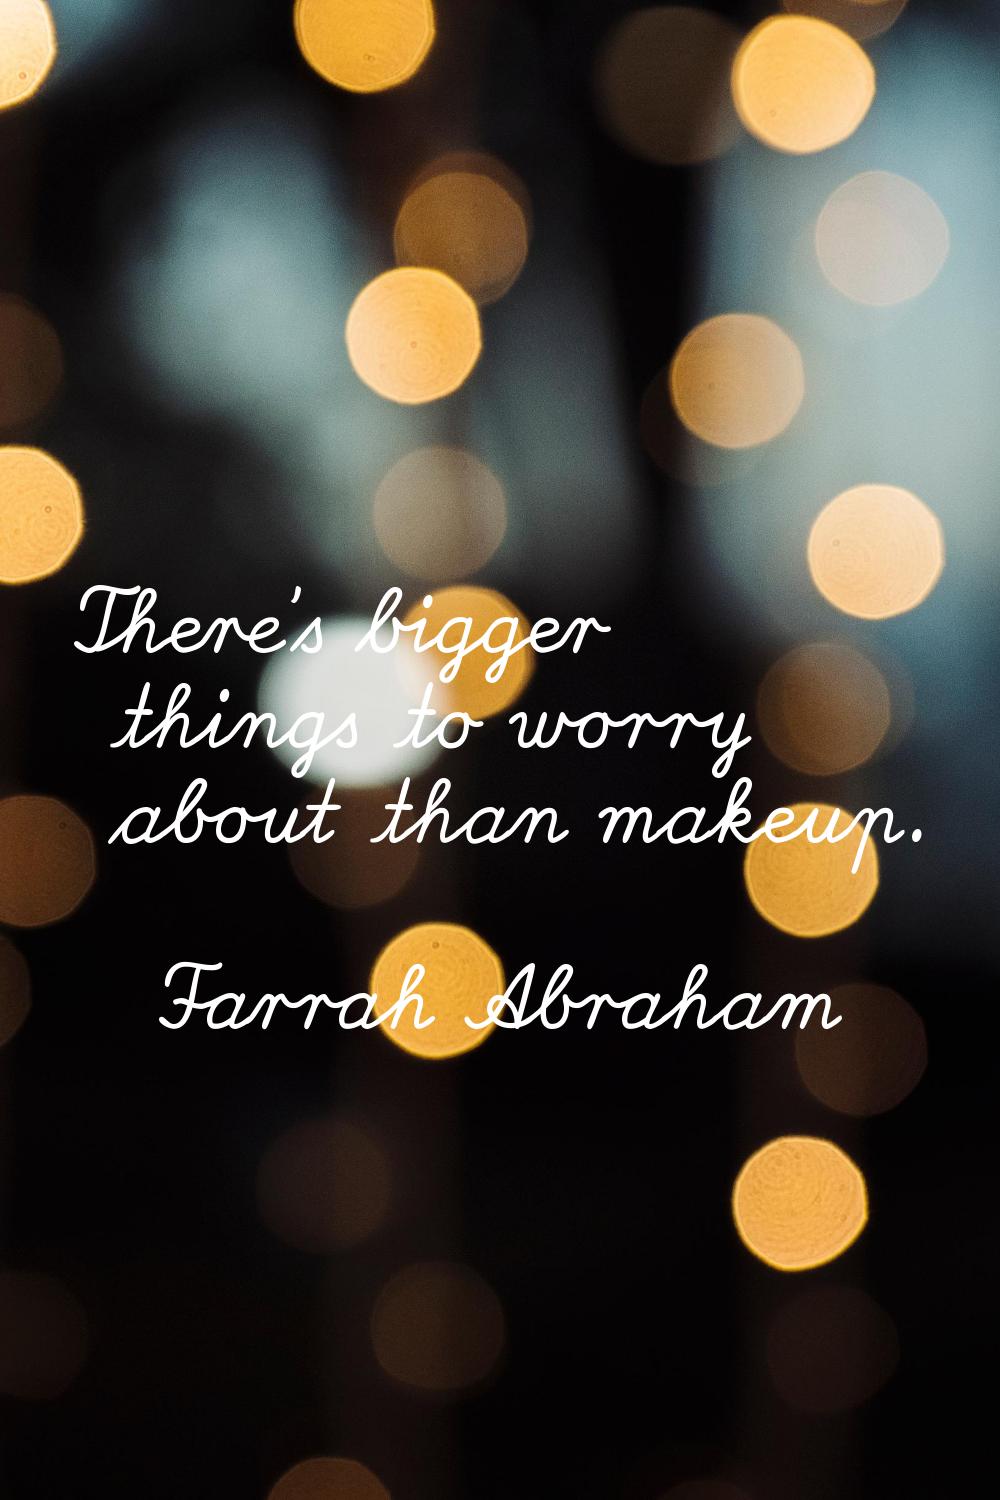 There's bigger things to worry about than makeup.